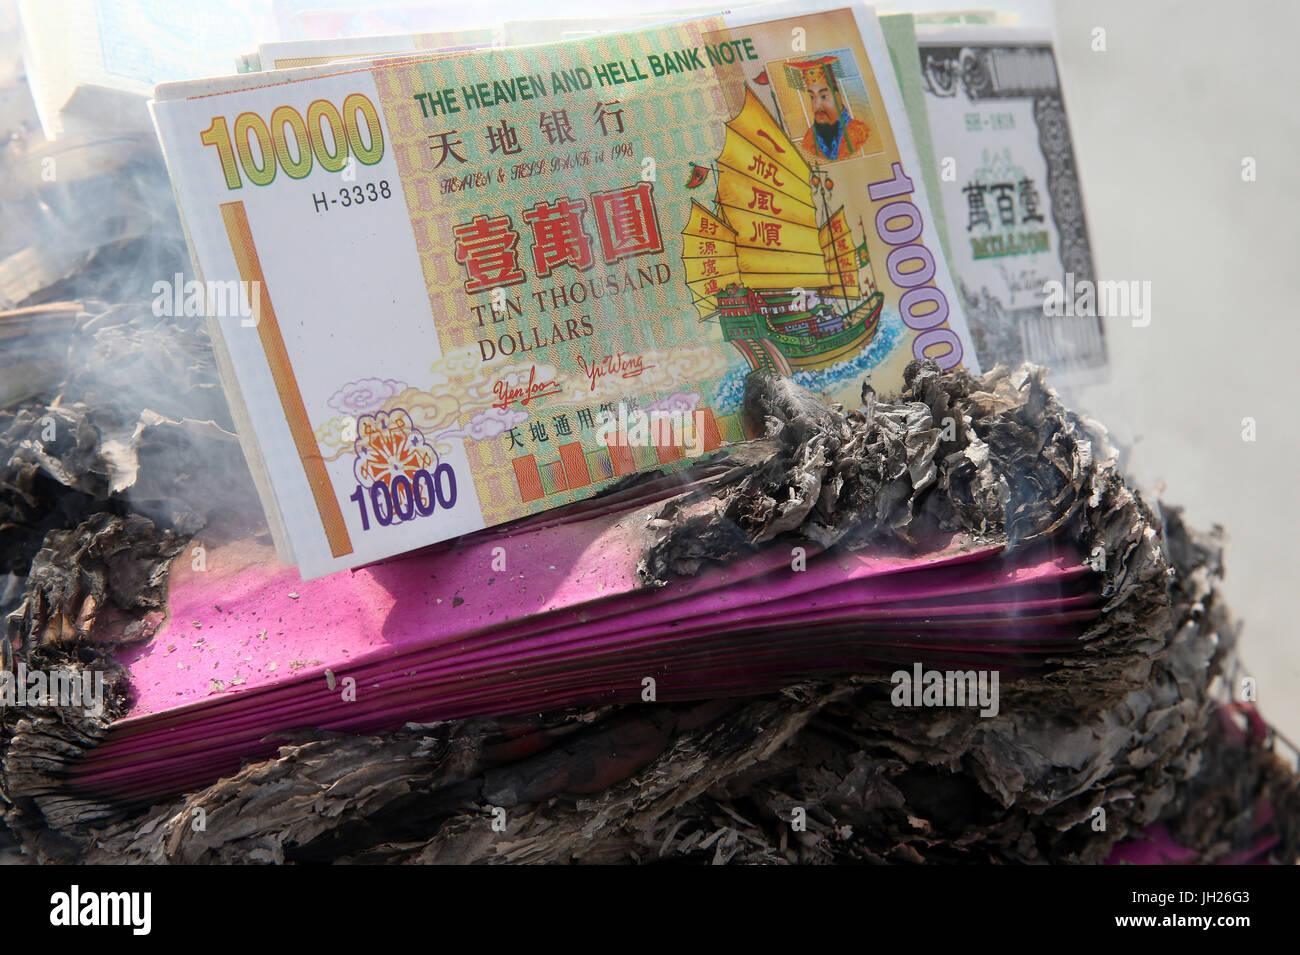 Hungry Ghost Festival (Ullambana). Ancestor worship.  Burning hell bank notes and other forms of joss paper. Singapore. Stock Photo